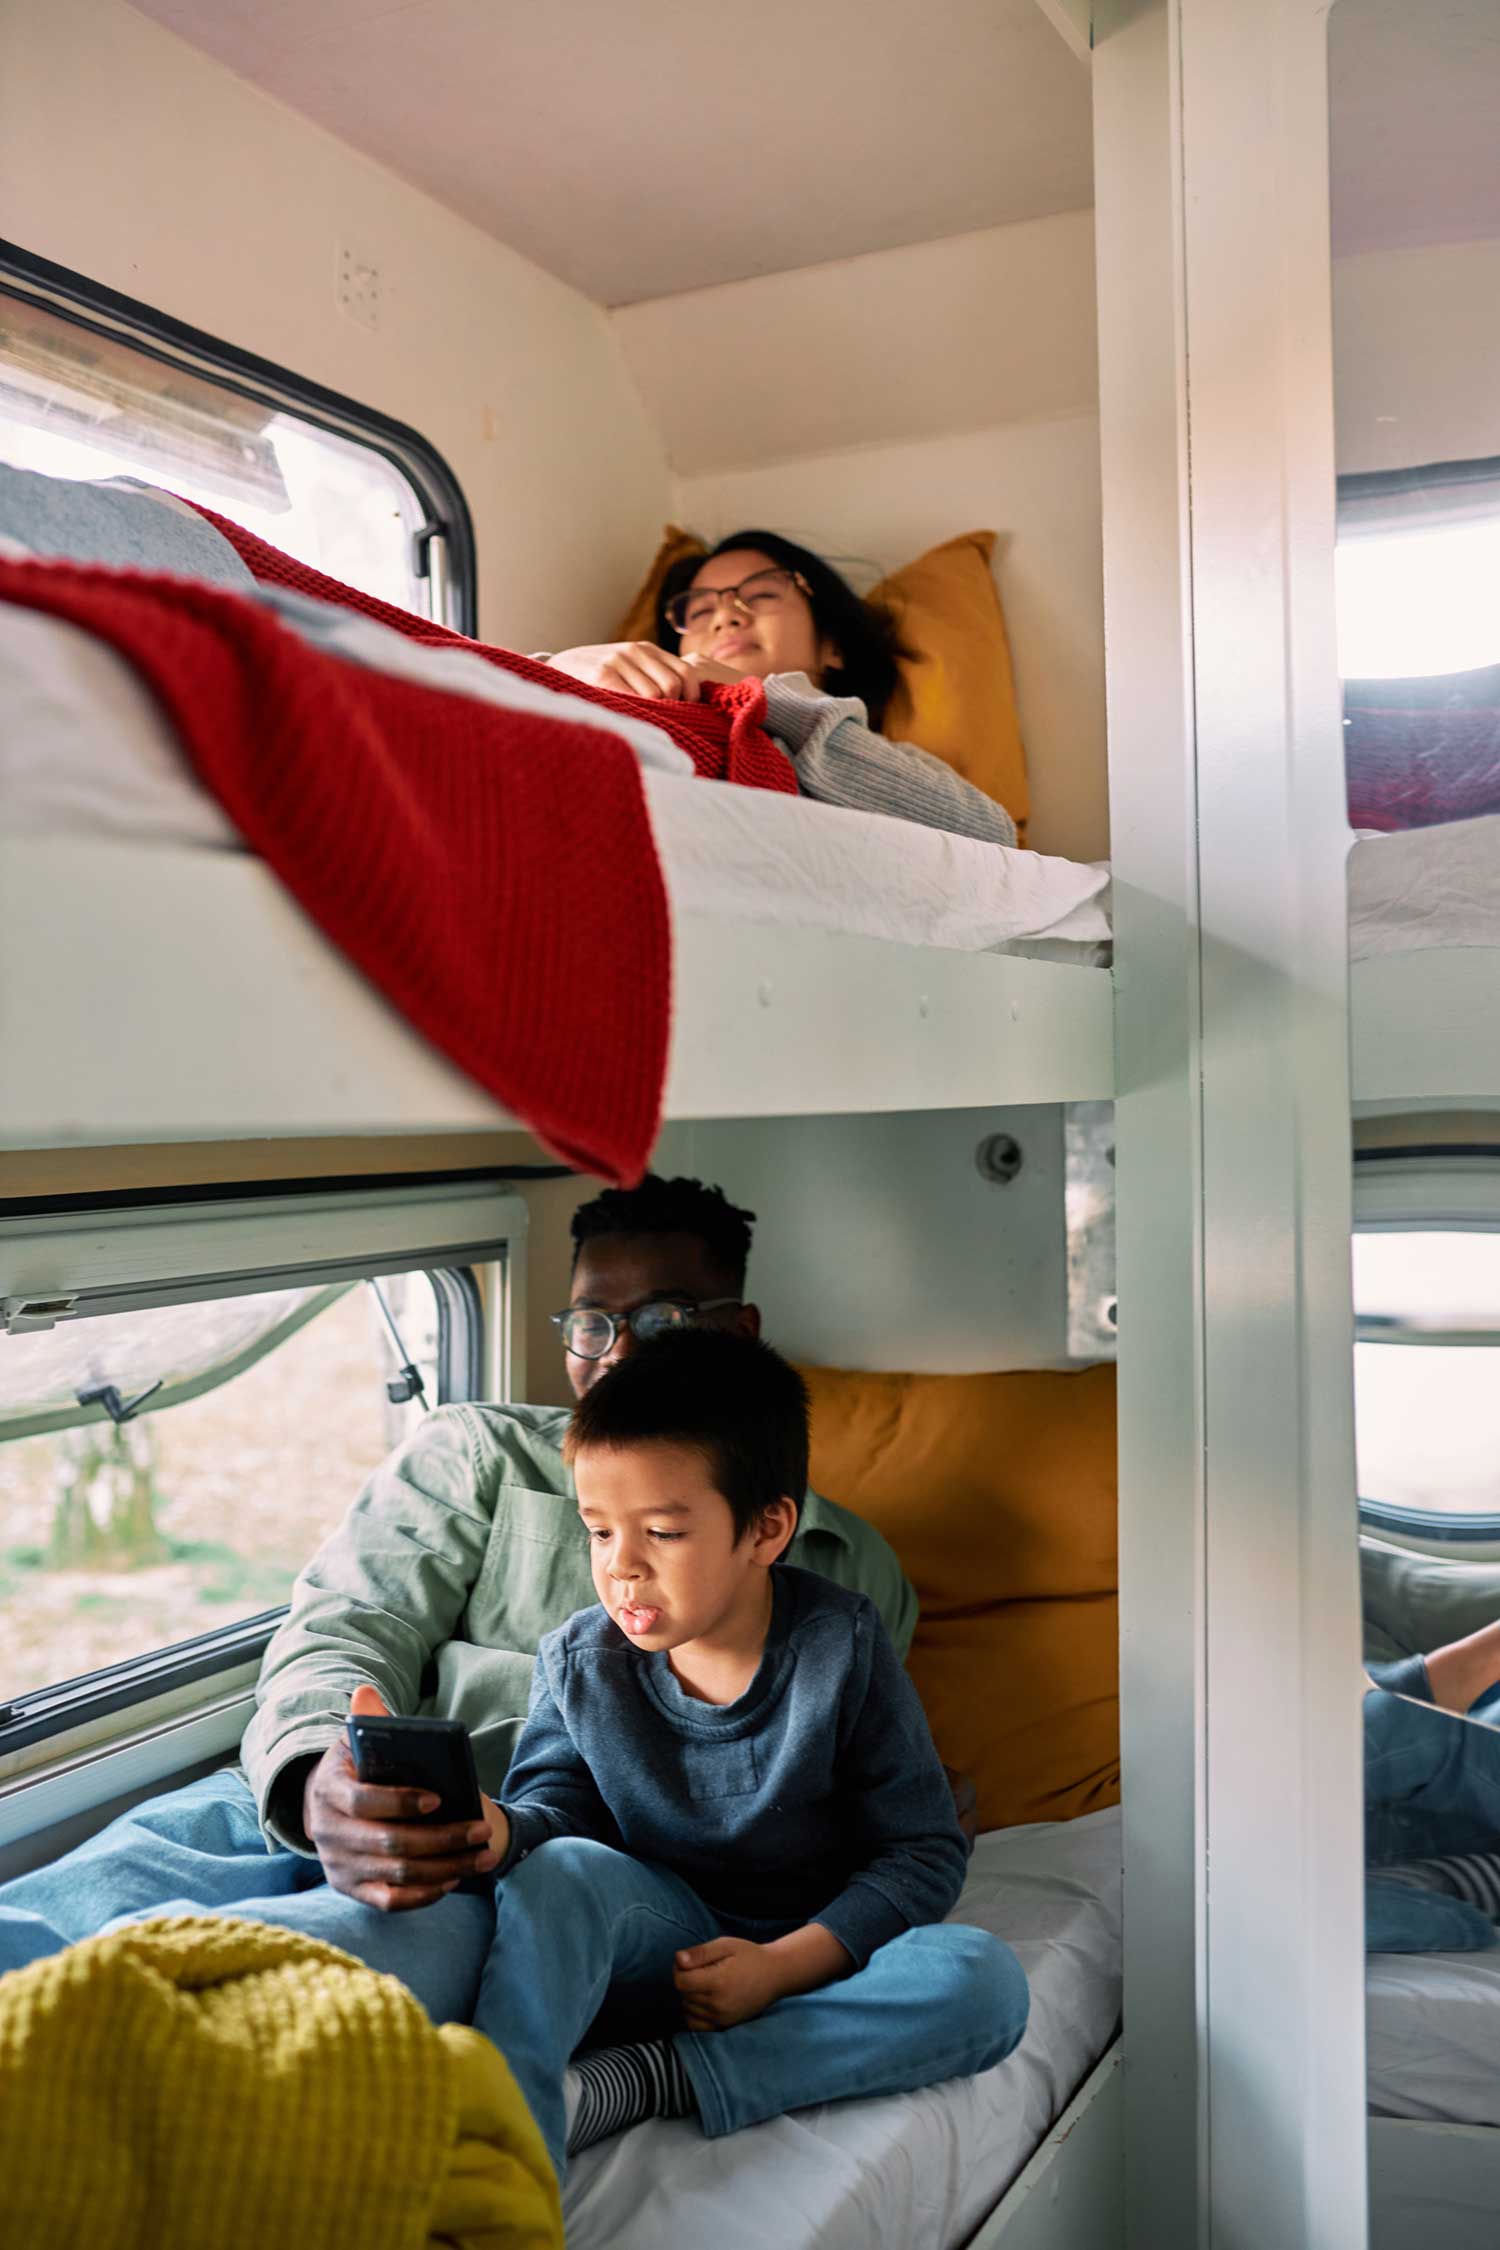 A multicultural nomadic family relaxes in a van